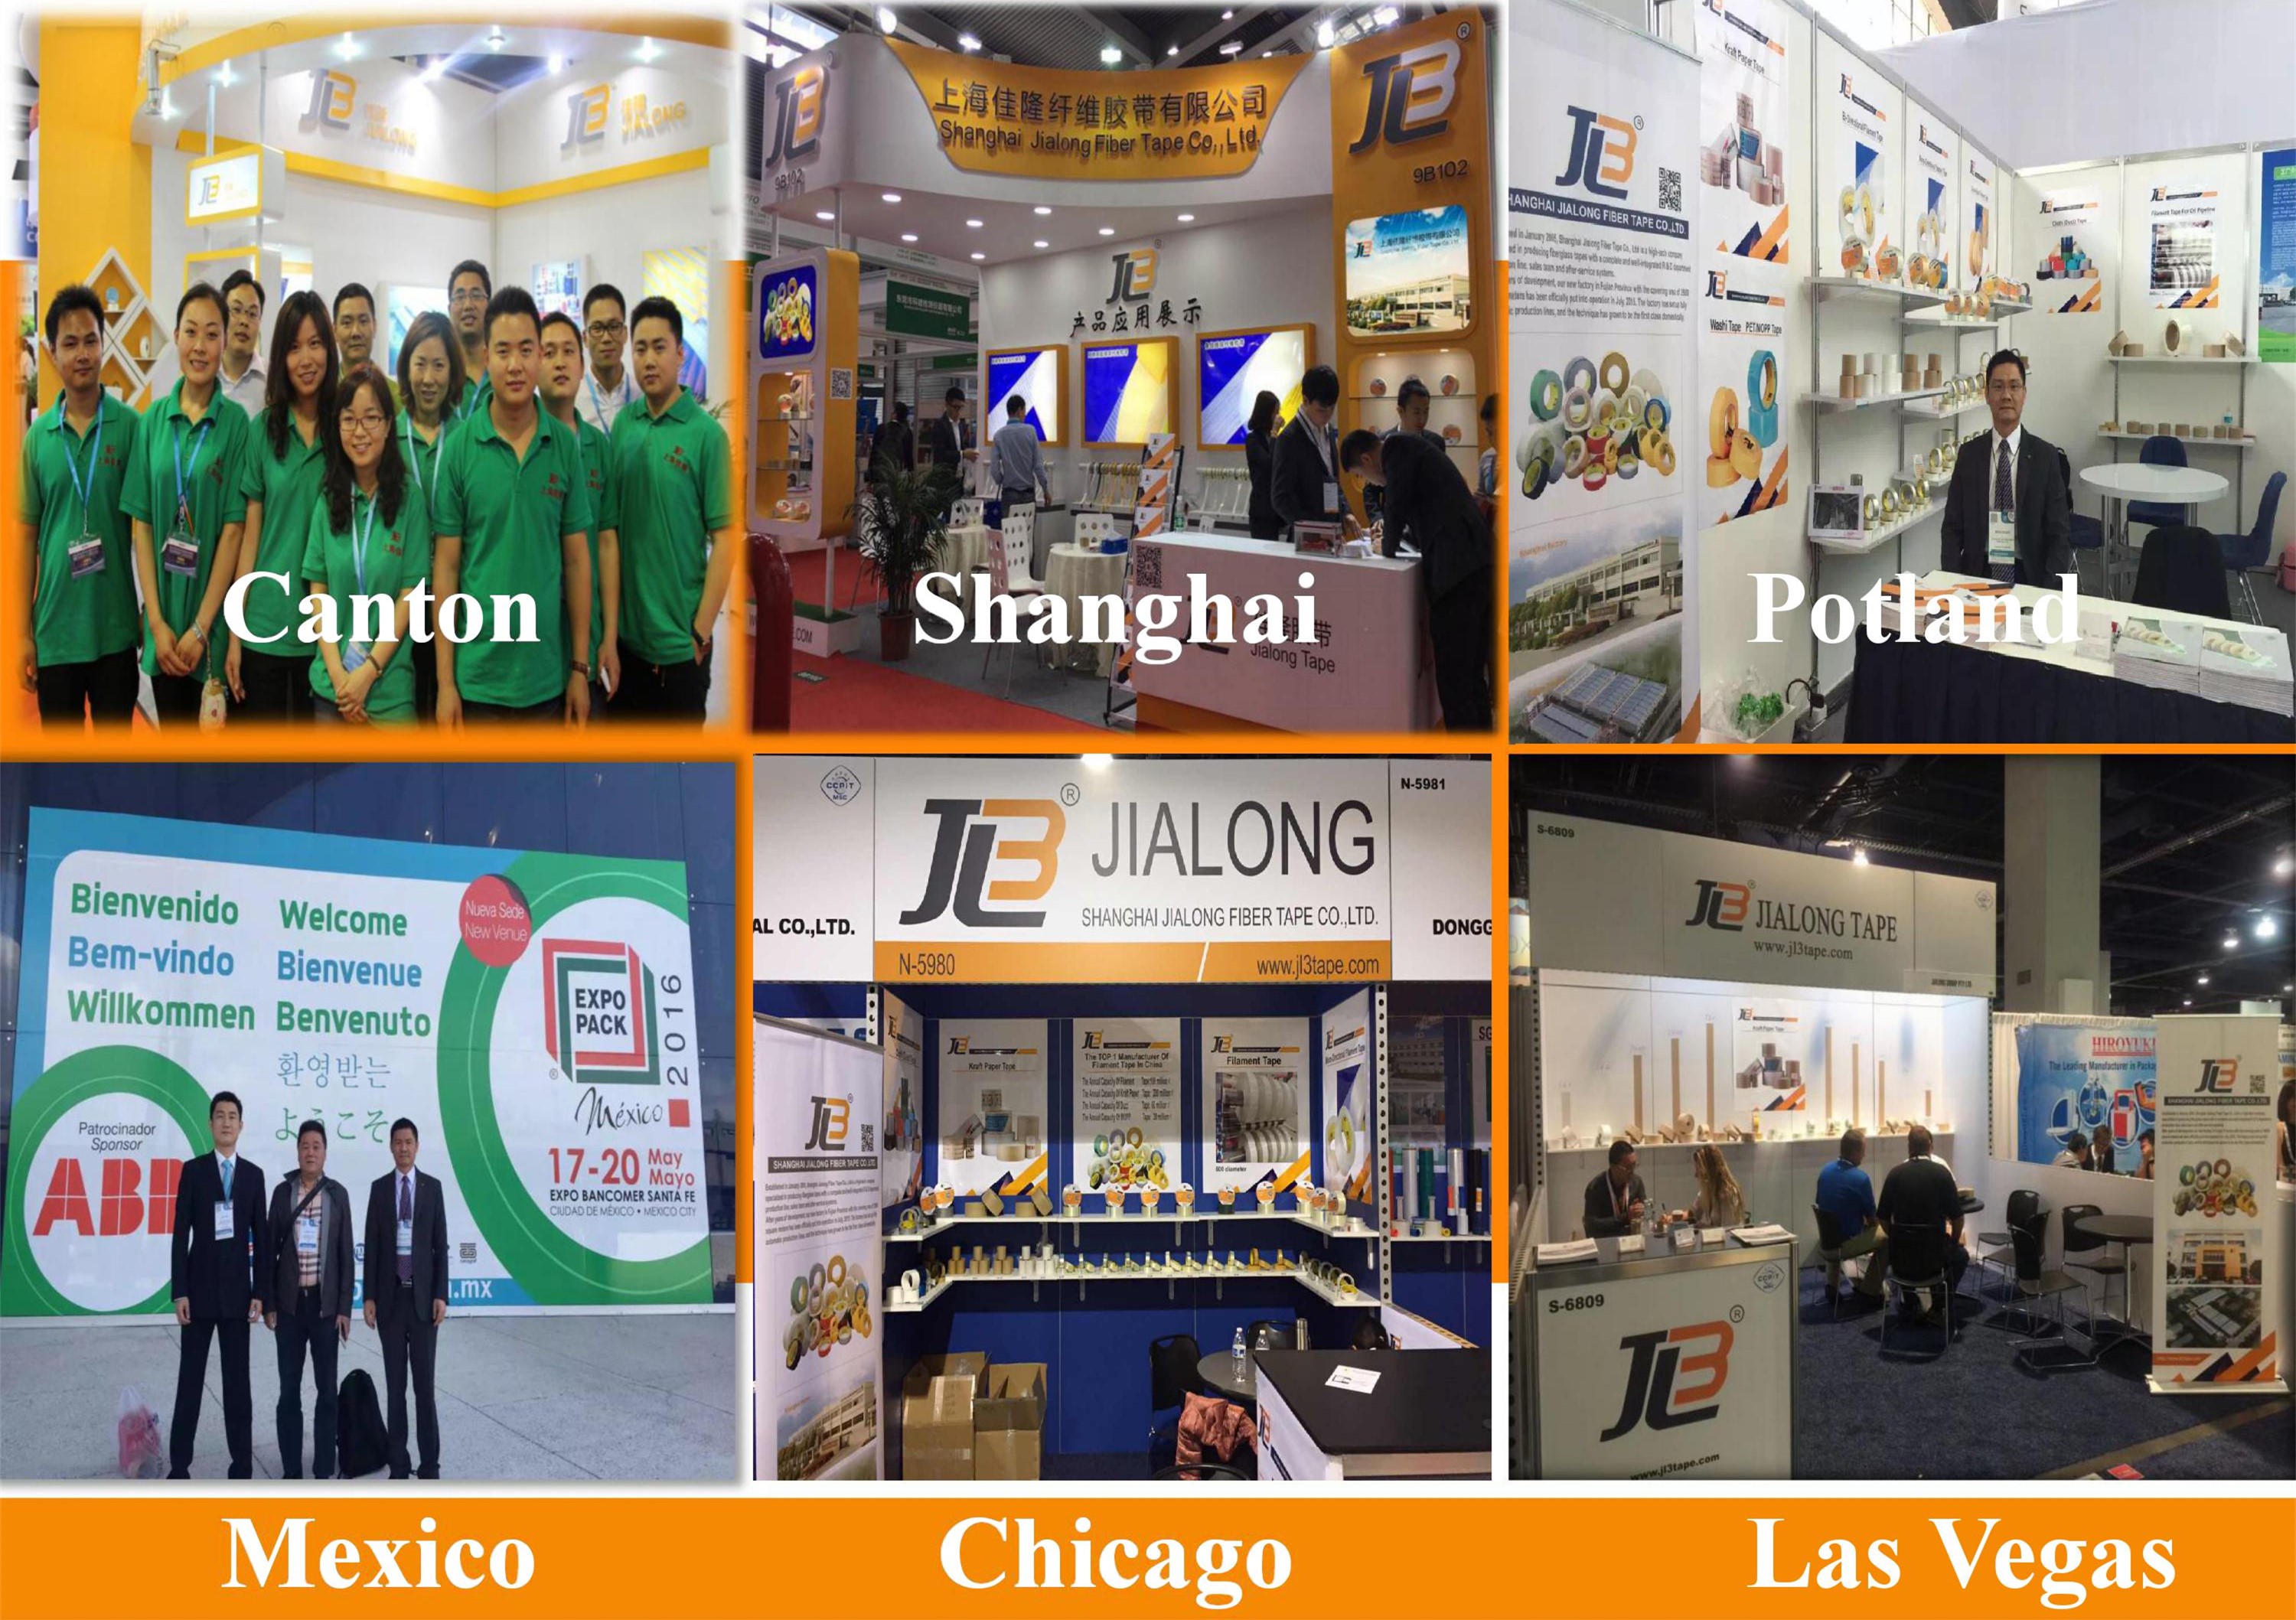 The Trade Fairs We Are Going To Attend In The Year Of 2020 / 2021